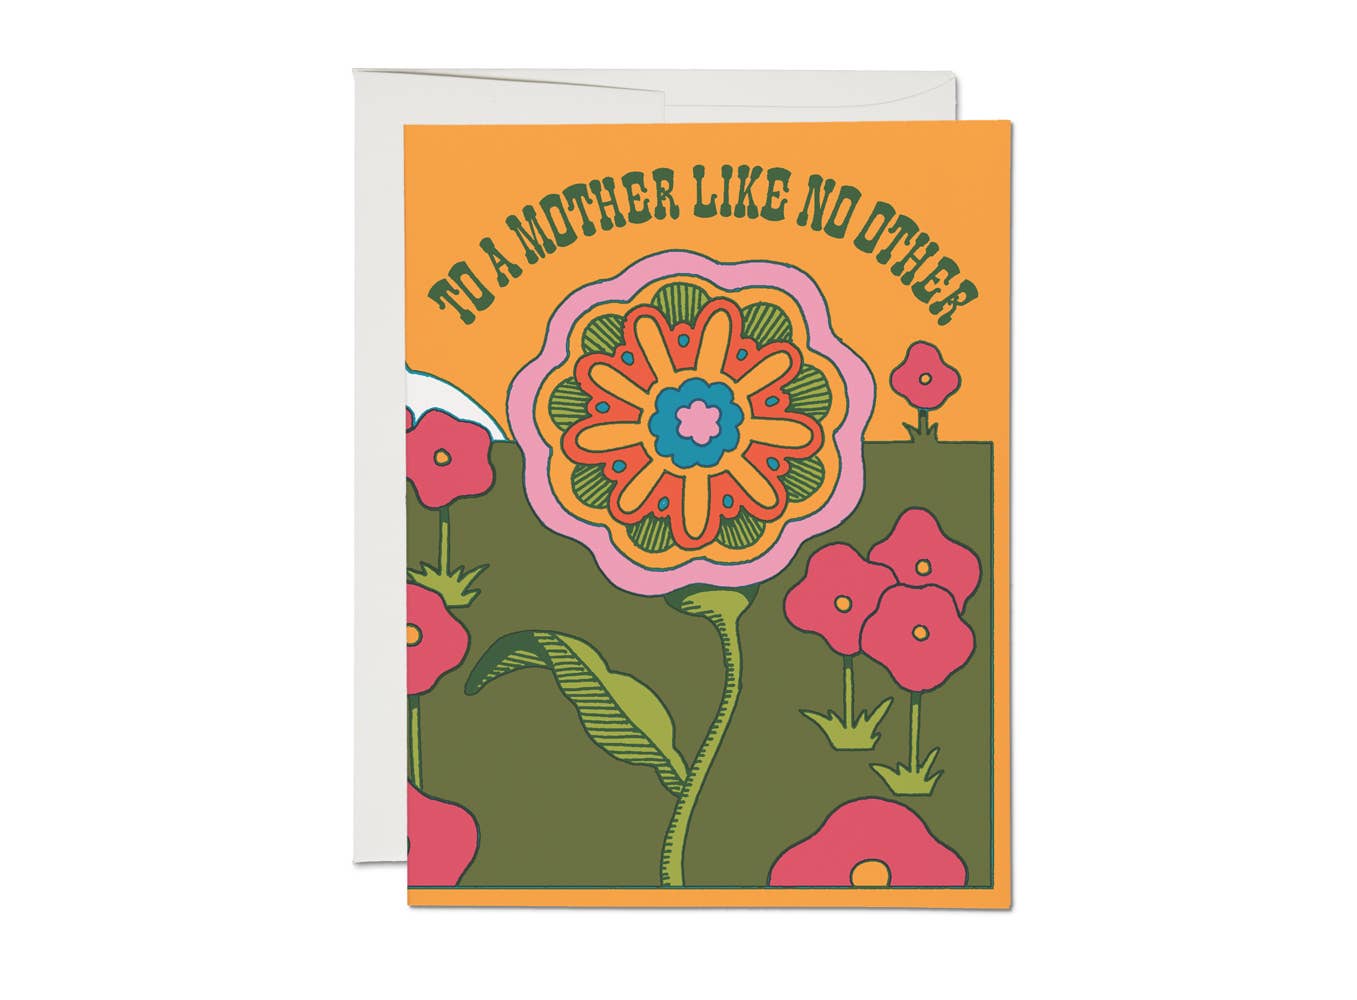 Special Mother Mother's Day greeting card - The Crowd Went Wild